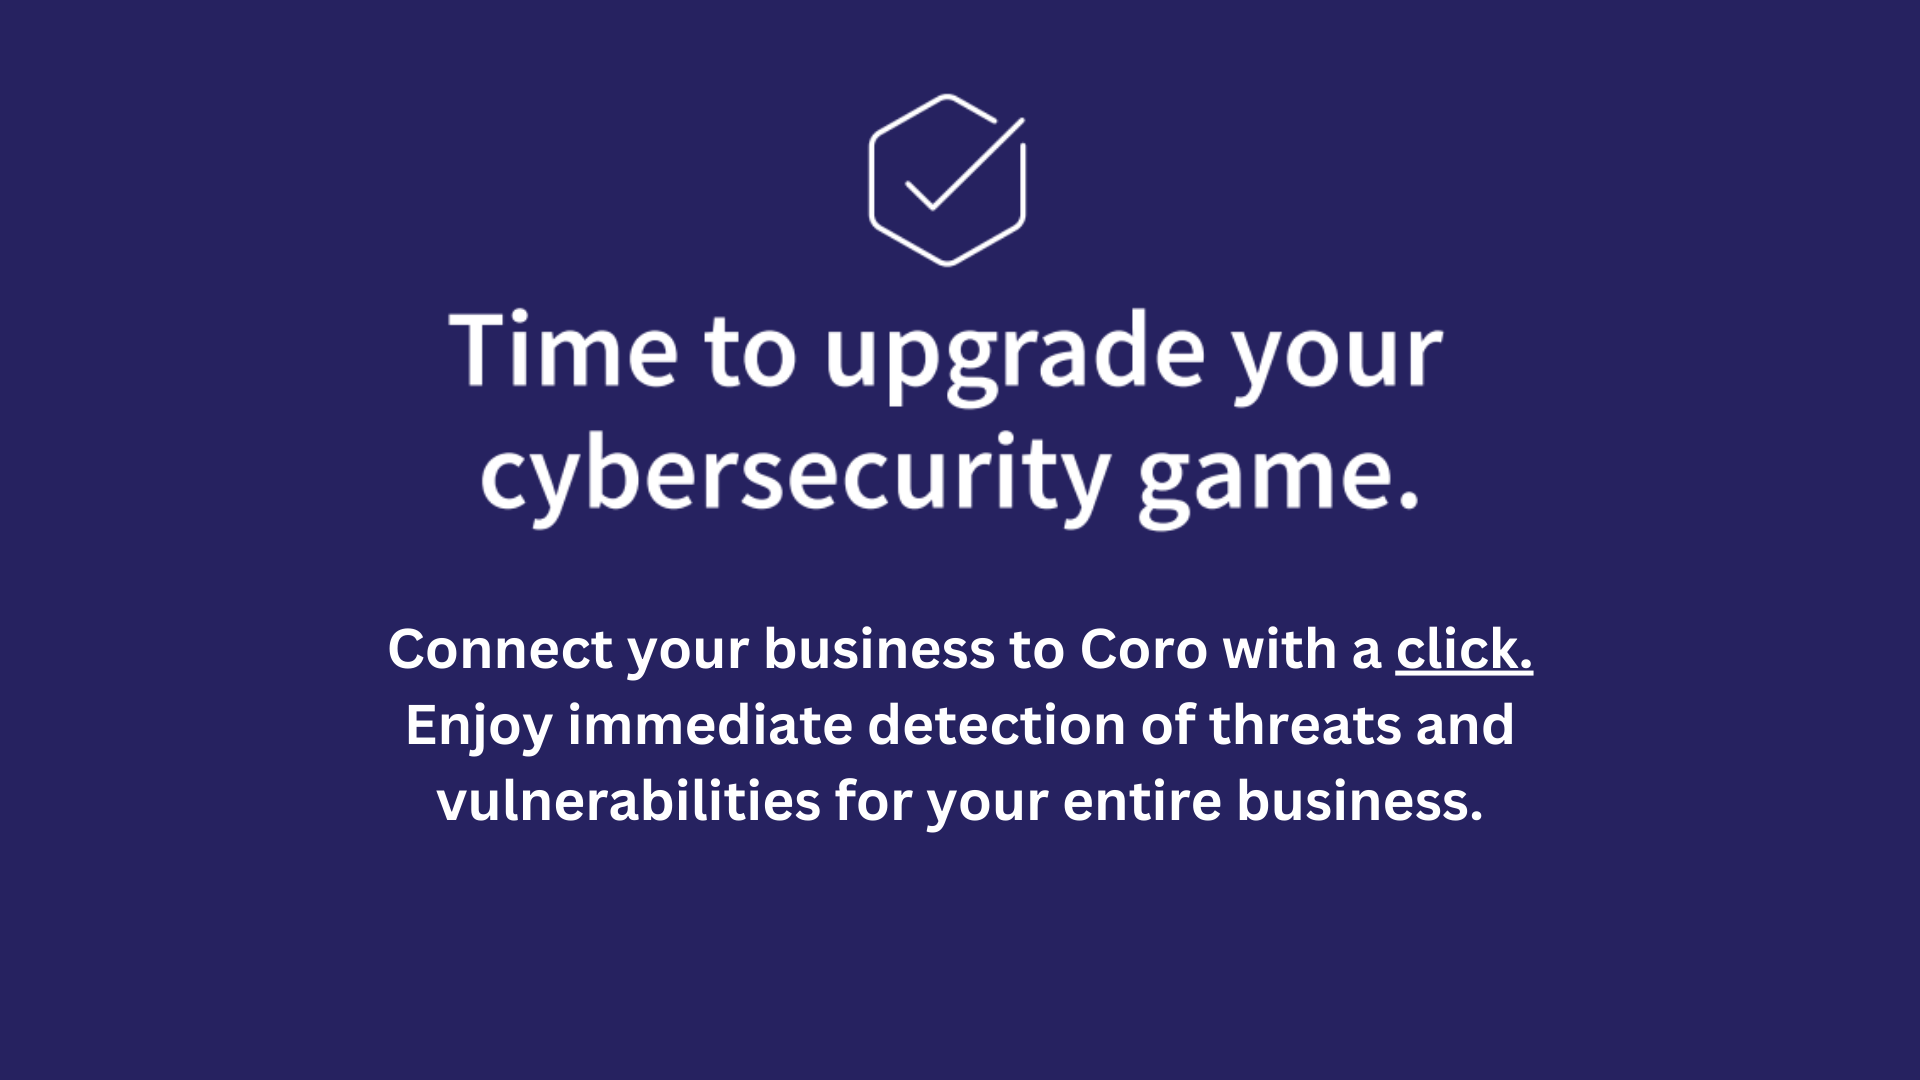 Time to Upgrade you cybersecurity game. Connect your business with a click.